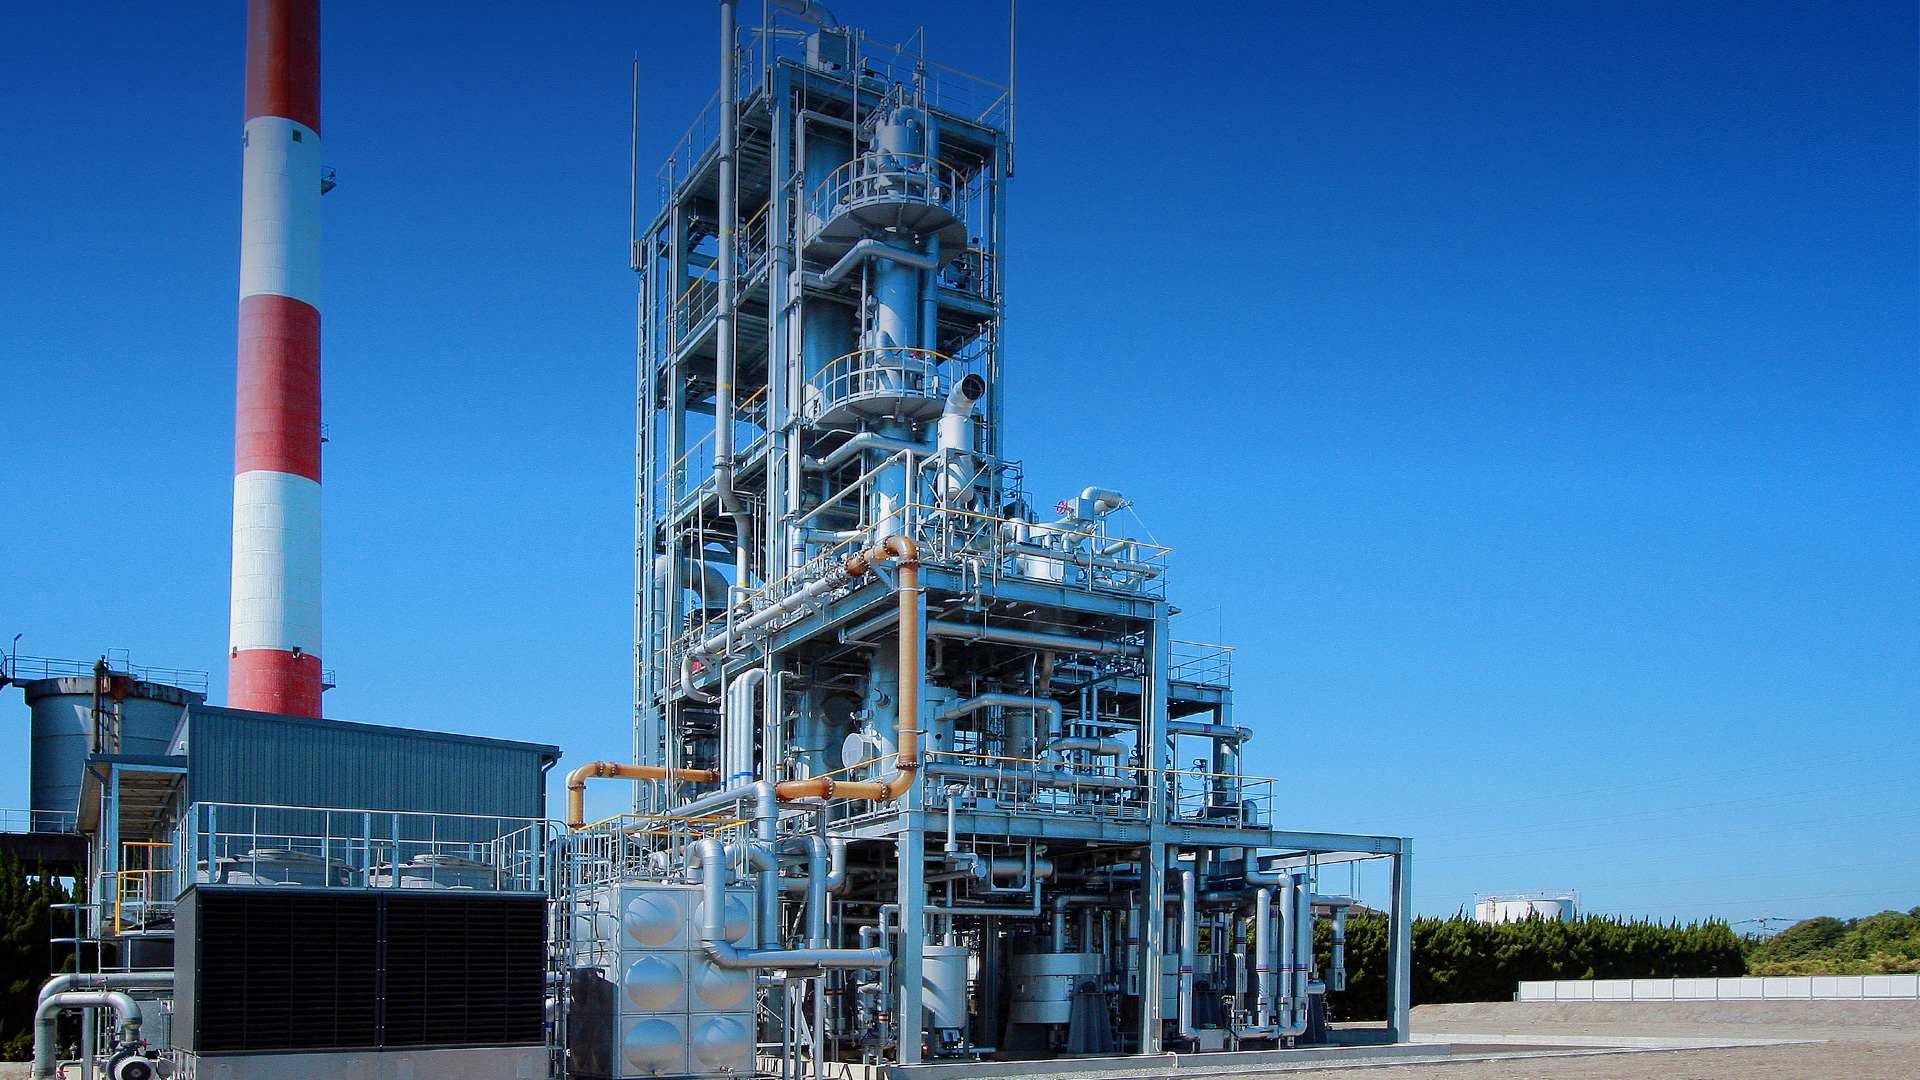 Toshiba ESS owns and operates a CO2 capture pilot plant to develop, improve and demonstrate the technology